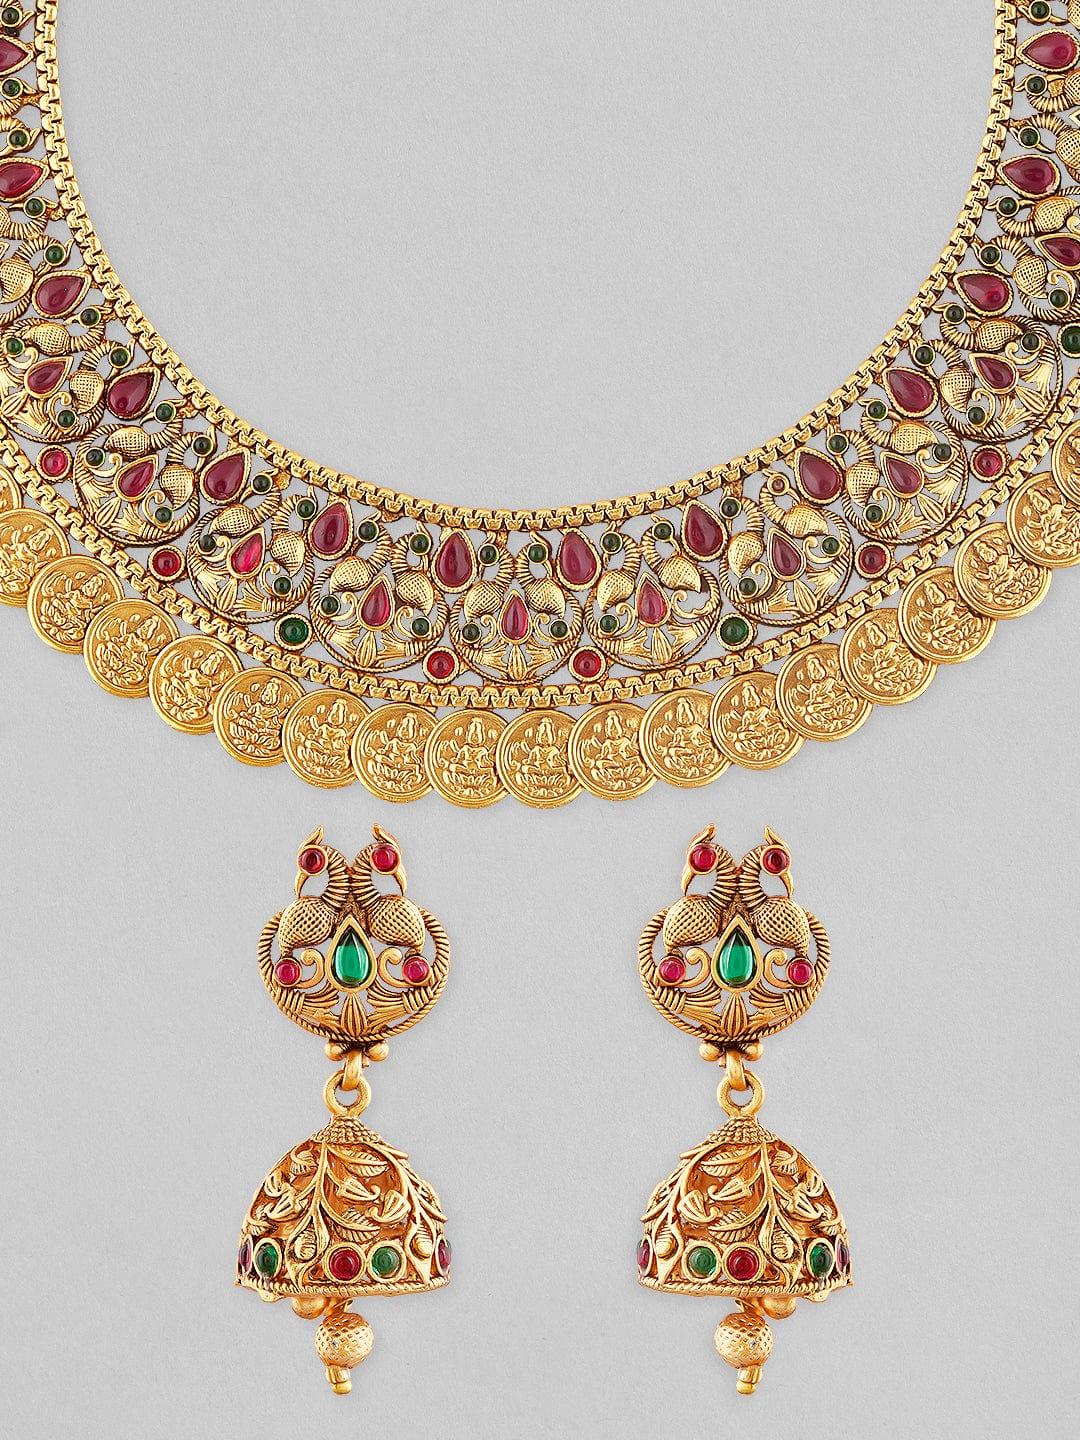 Rubans 22K Gold Plated Temple Necklace Set With Brown Beads. - Indiakreations